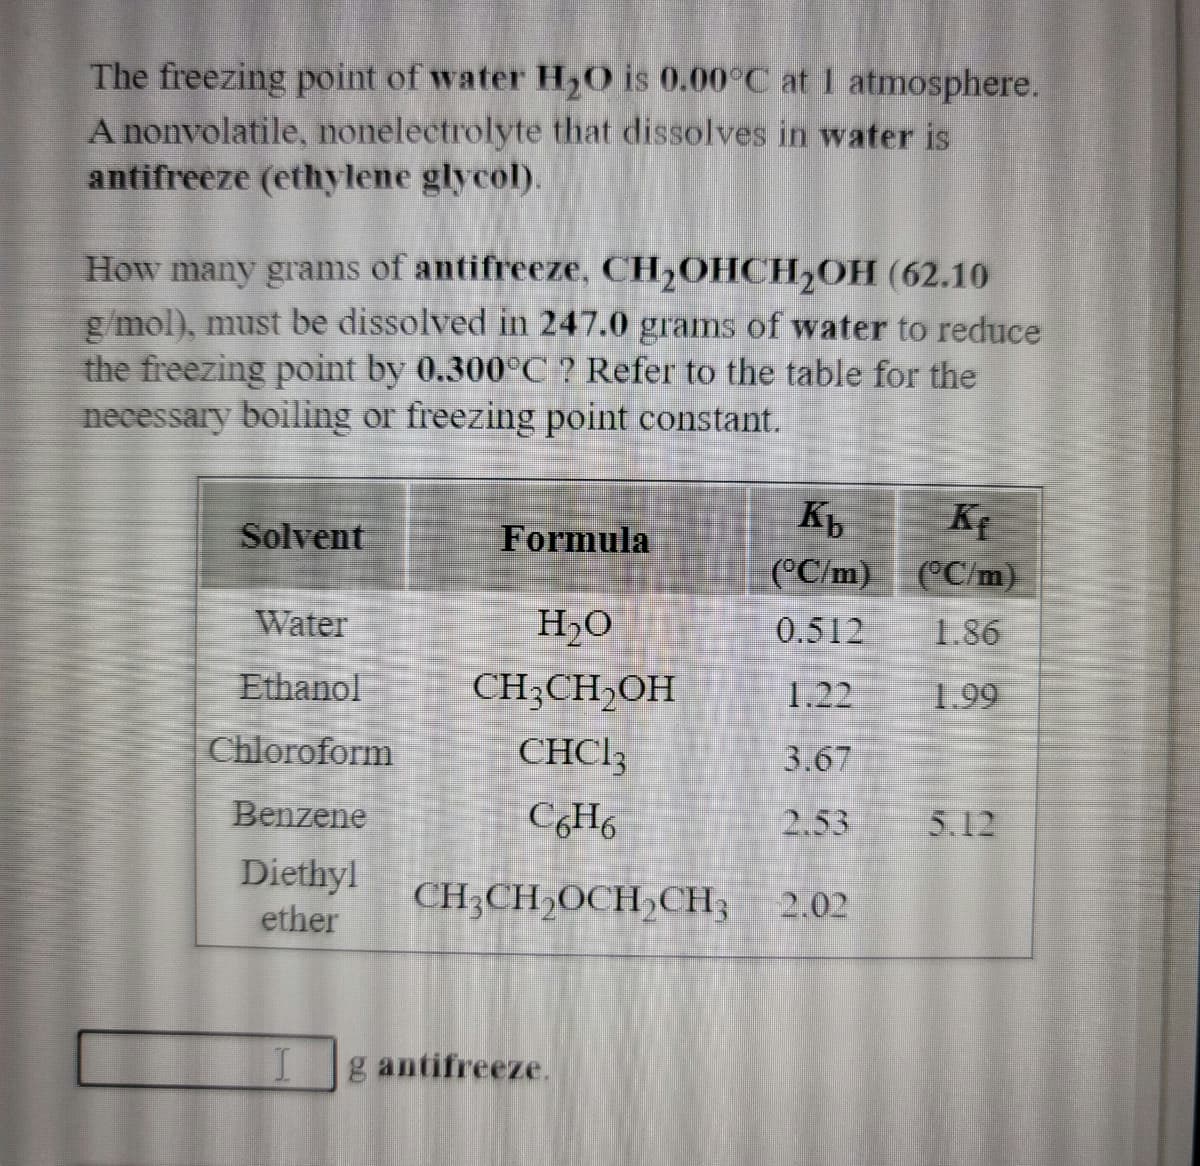 The freezing point of water H20 is 0.00°C at 1 atmosphere.
A nonvolatile, nonelectrolyte that dissolves in water is
antifreeze (ethylene glycol).
How many grams of antifreeze, CH,OHCH2OH (62.10
g/mol), must be dissolved in 247.0 grams of water to reduce
the freezing point by 0.300°C ? Refer to the table for the
necessary boiling or freezing point constant.
Solvent
Formula
(°C/m)
(°C/m)
Water
H,O
0.512
1.86
Ethanol
CH3CH,OH
1.22
1.99
Chloroform
CHCI3
3.67
Benzene
2.53
5.12
Diethyl
ether
CH;CH2OCH,CH3 2.02
g antifreeze.
